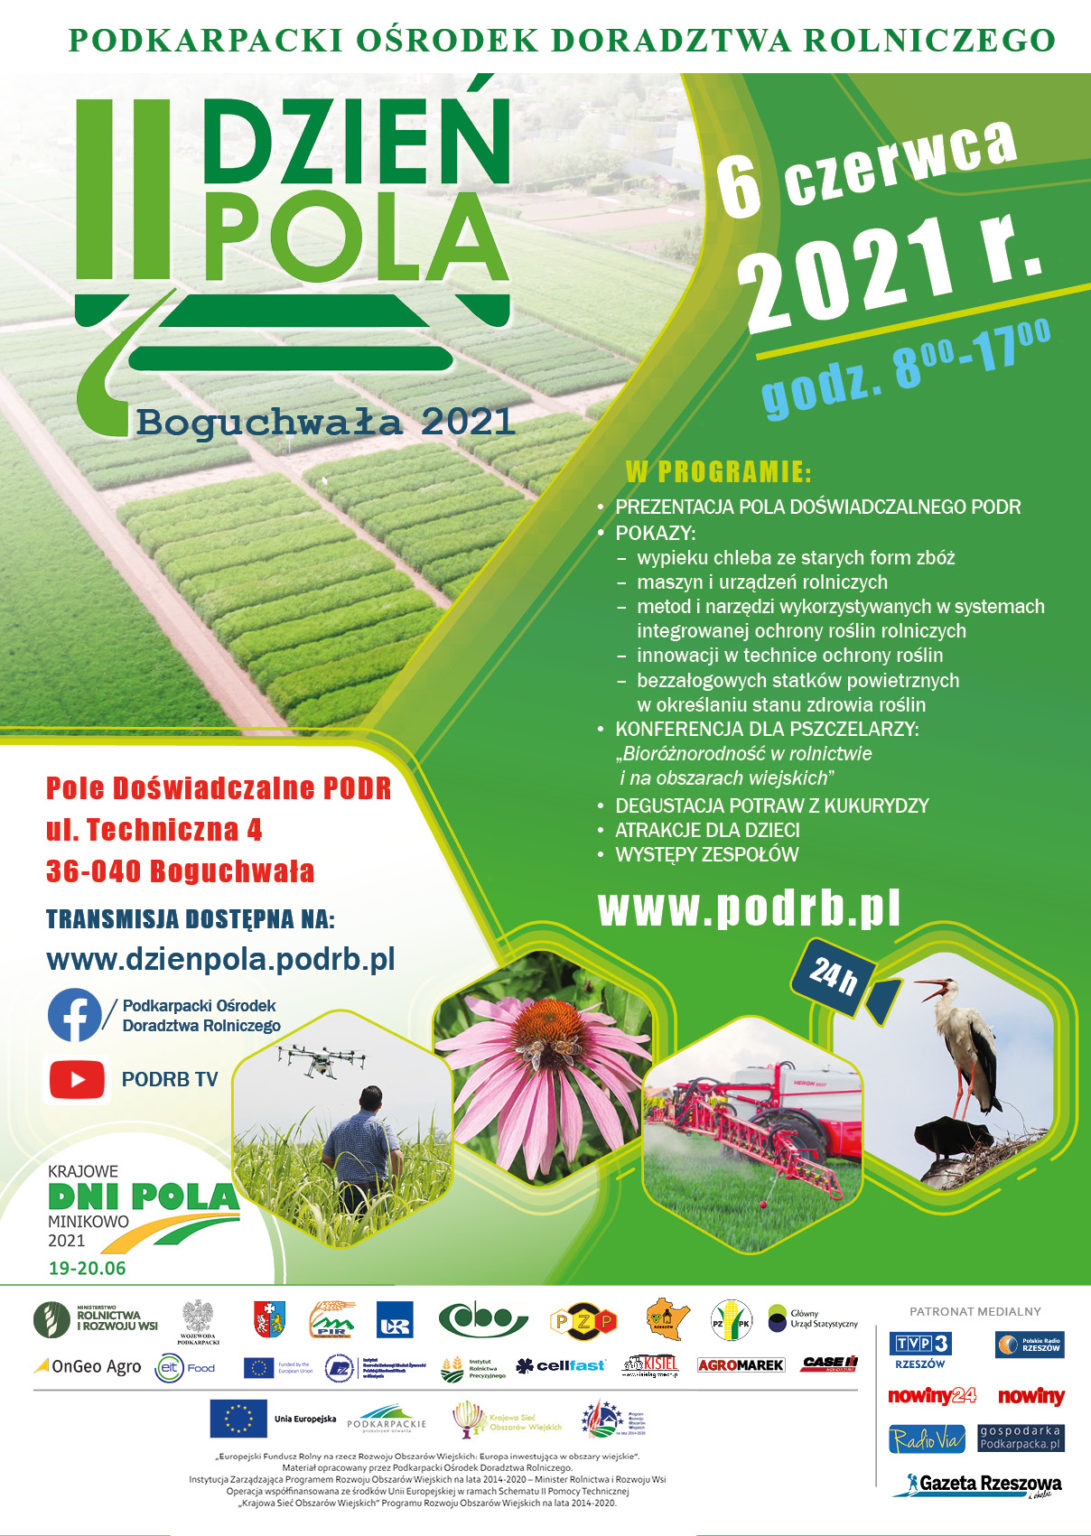 The II Field Day in Poland